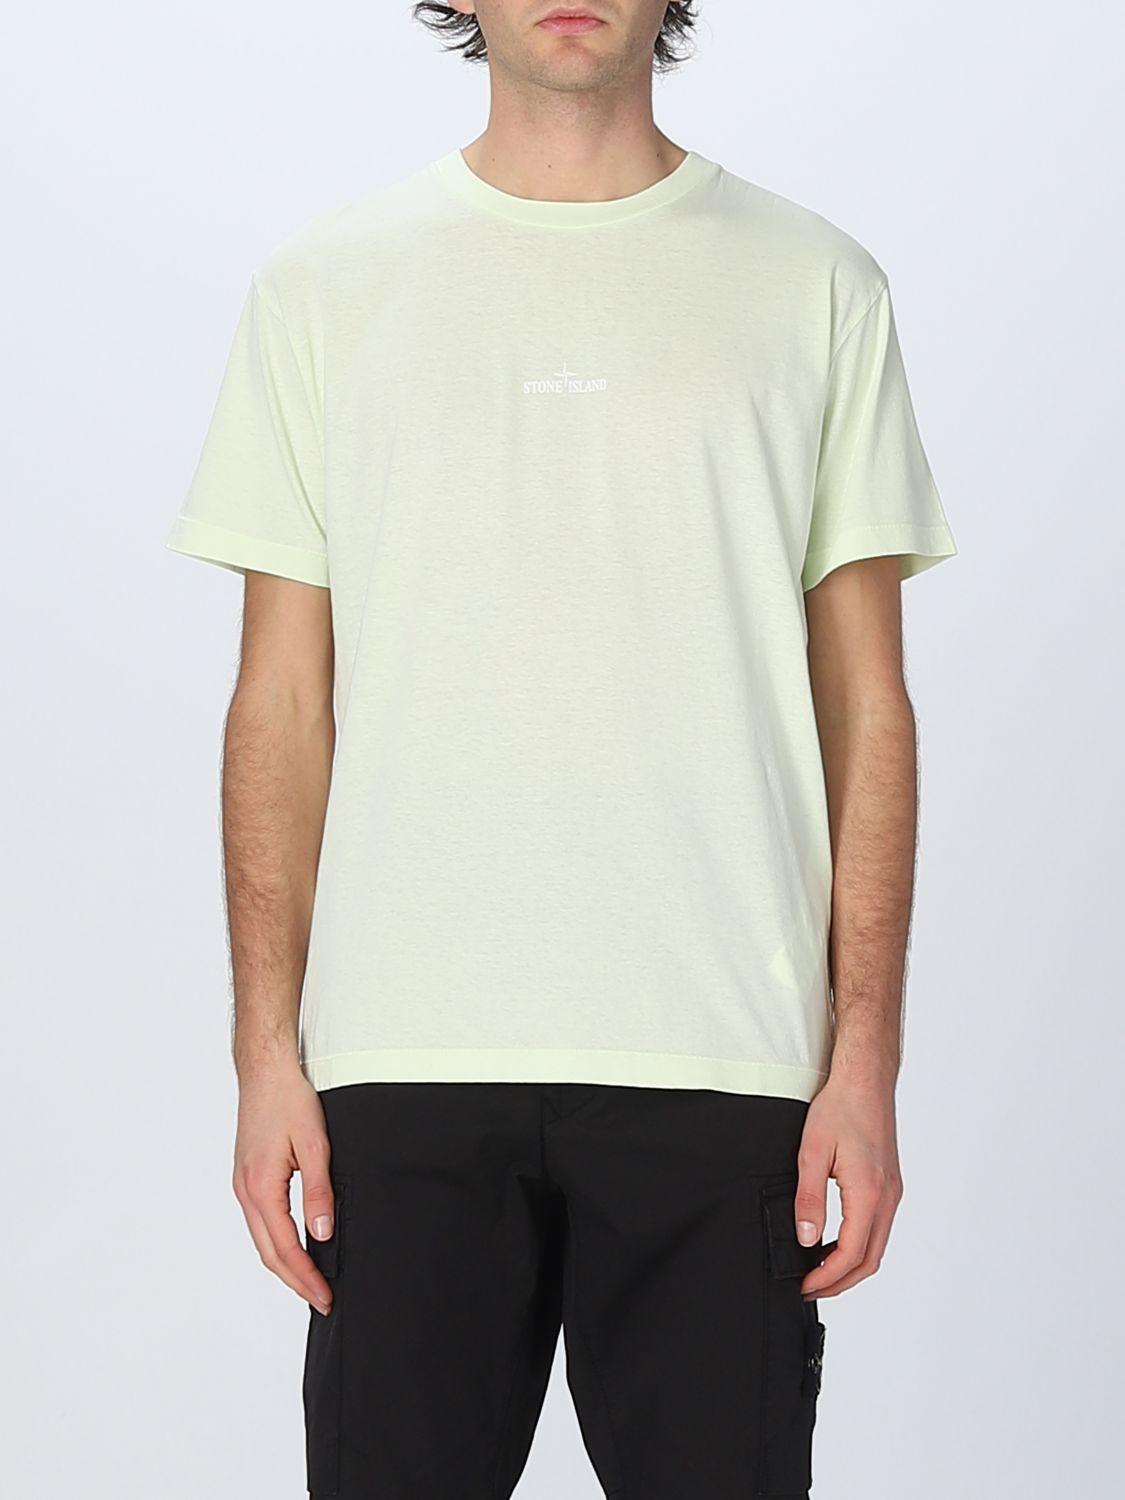 Stone Island T-shirt in White for Men | Lyst